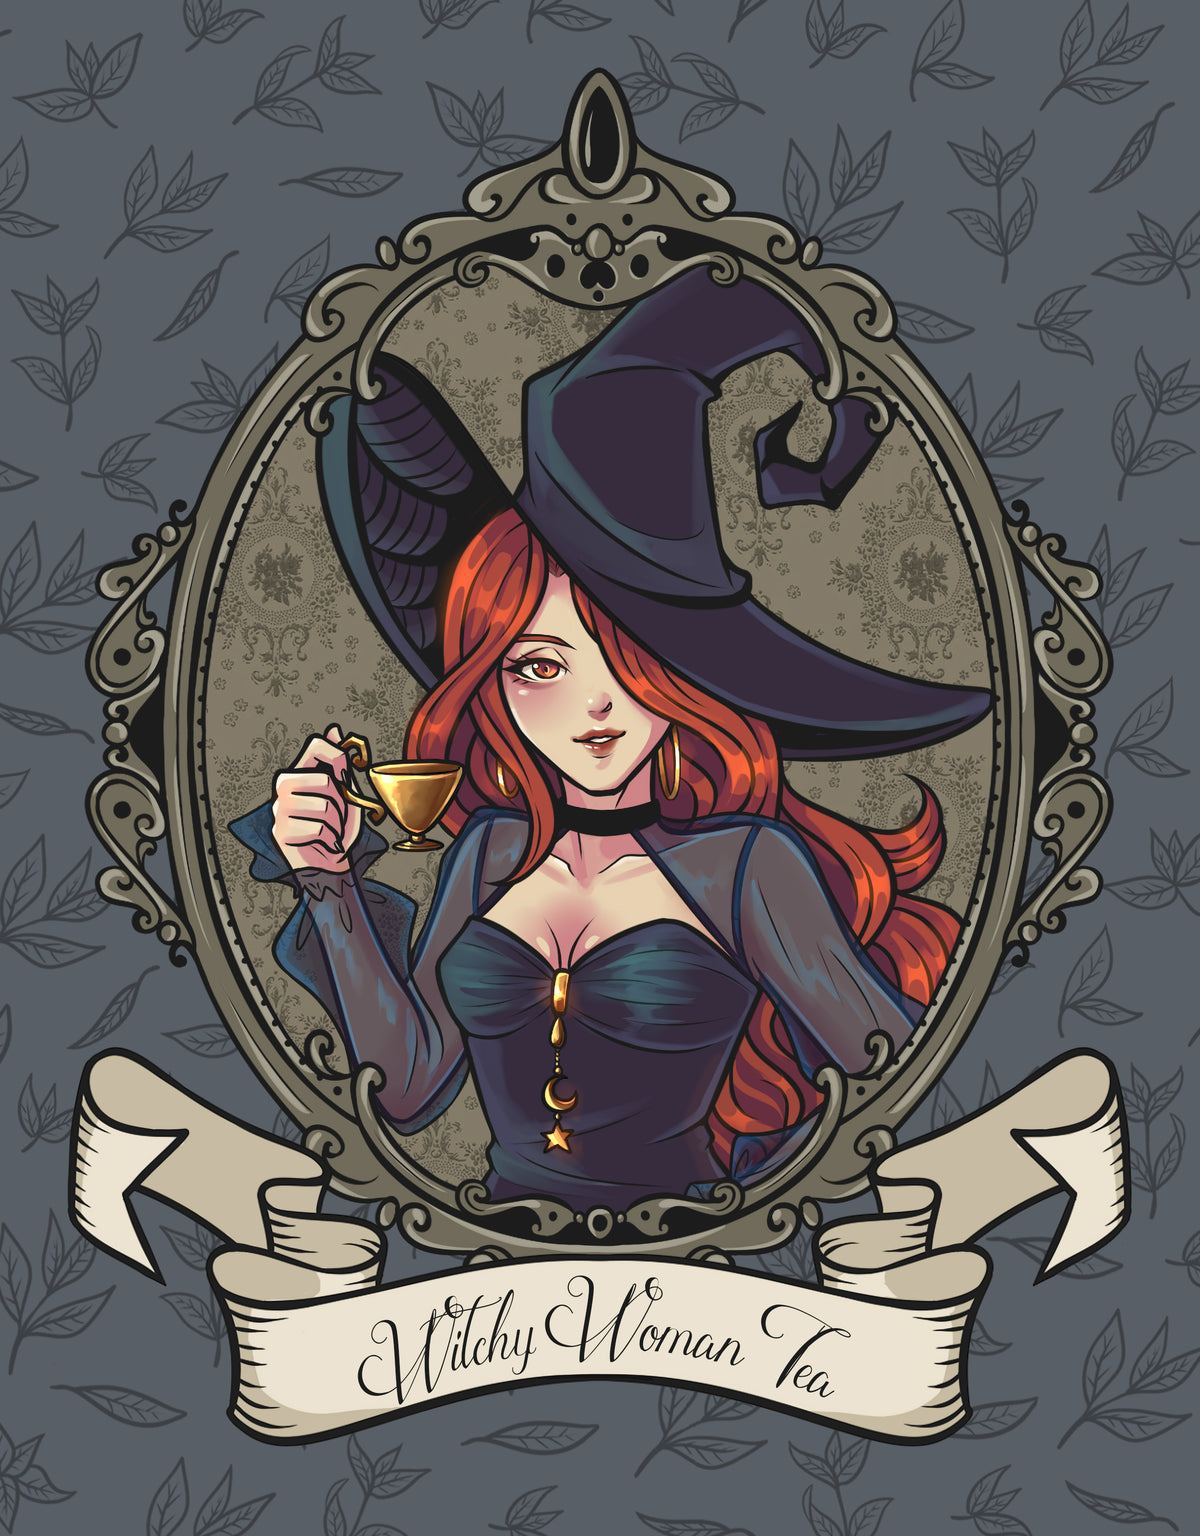 Witchy Woman Tea